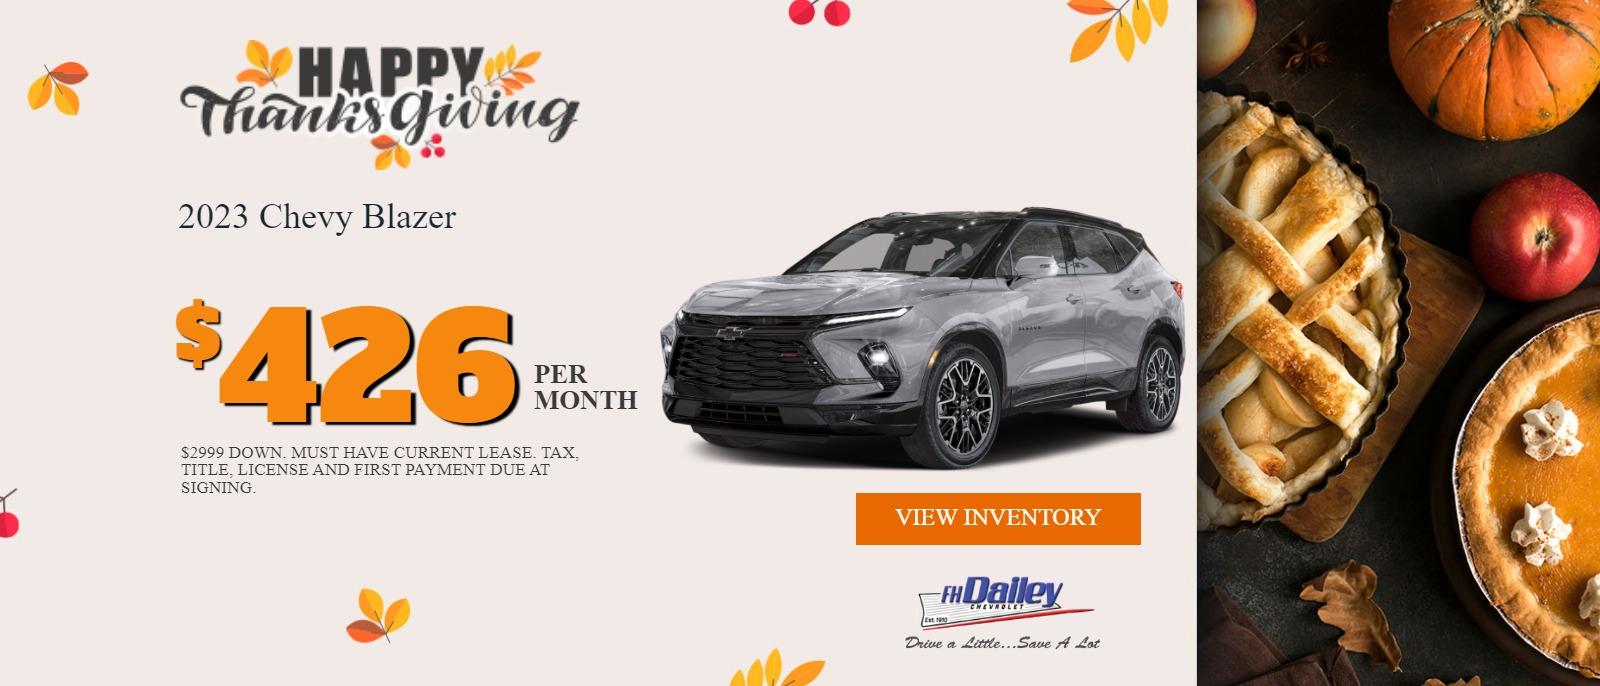 2023 CHEVY BLAZER
$2999 DOWN
$426 PER MONTH
*MUST HAVE CURRENT LEASE
*TAX, TITLE, LICENSE, AND FIRST PAYMENT DUE AT SIGNING